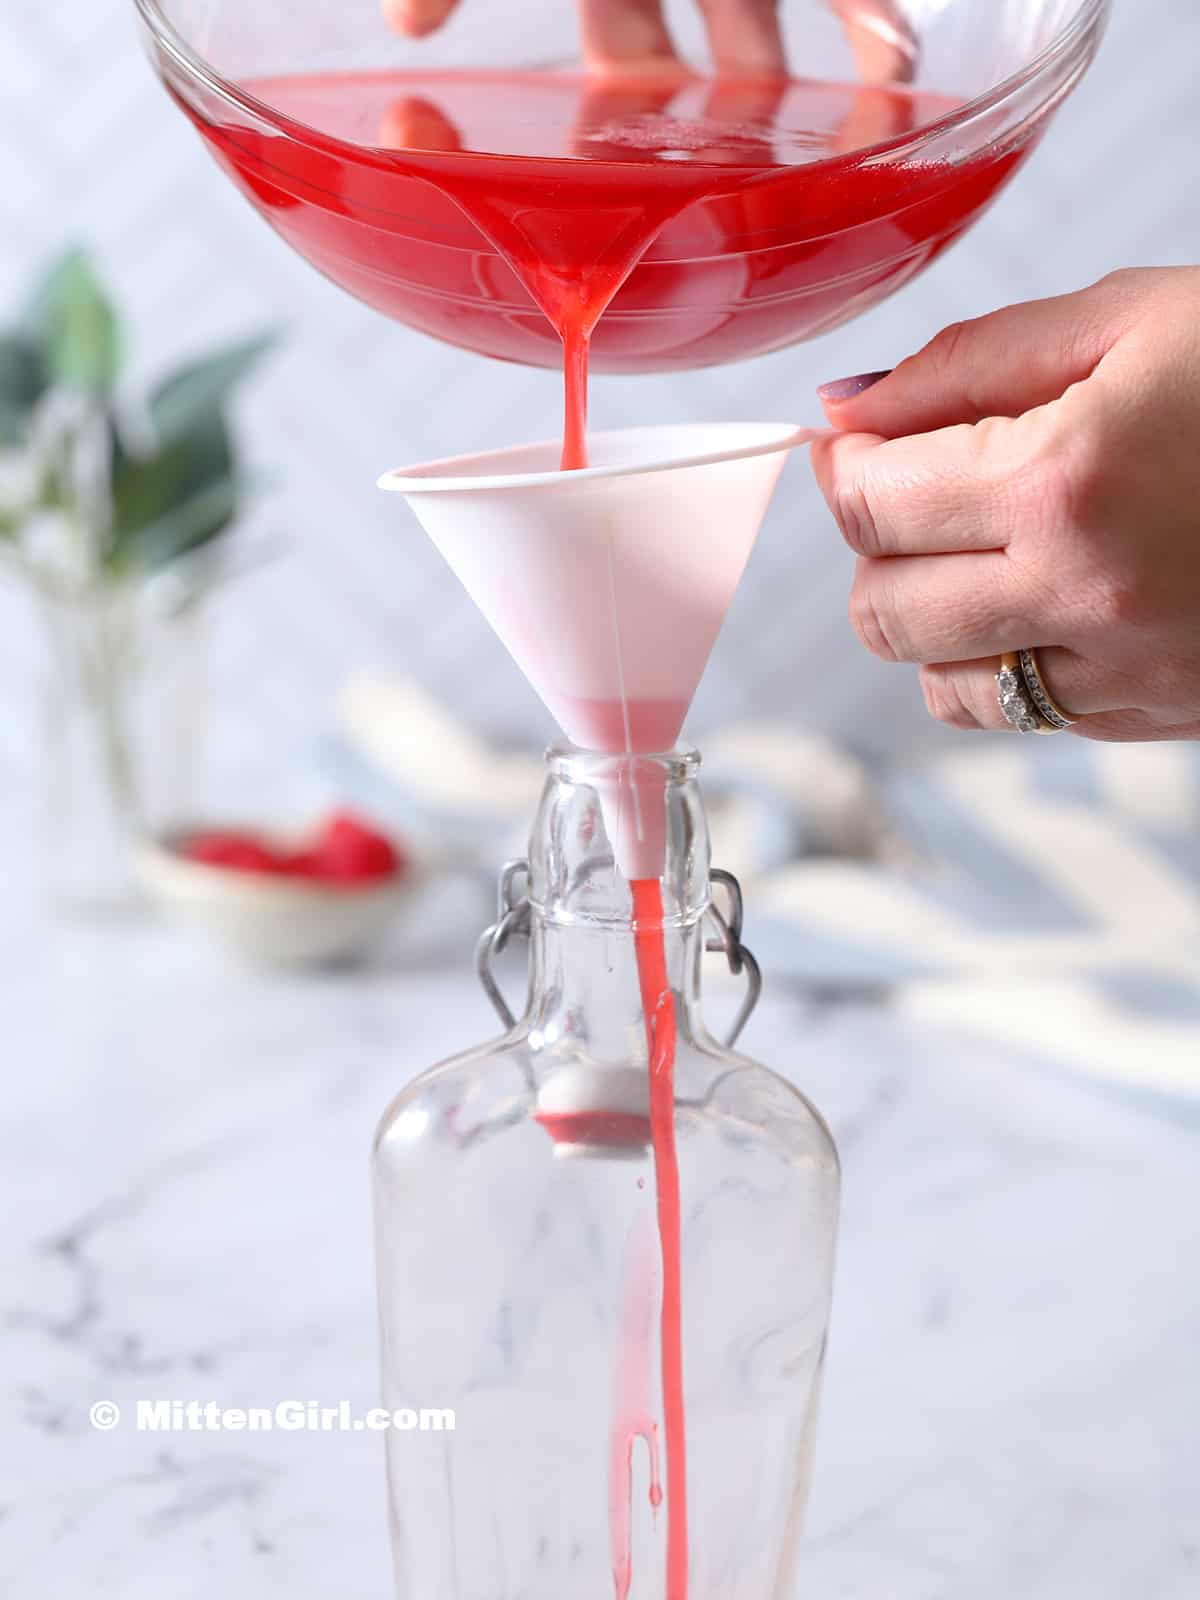 Syrup being poured from a bowl through a funnel and into a glass jar.